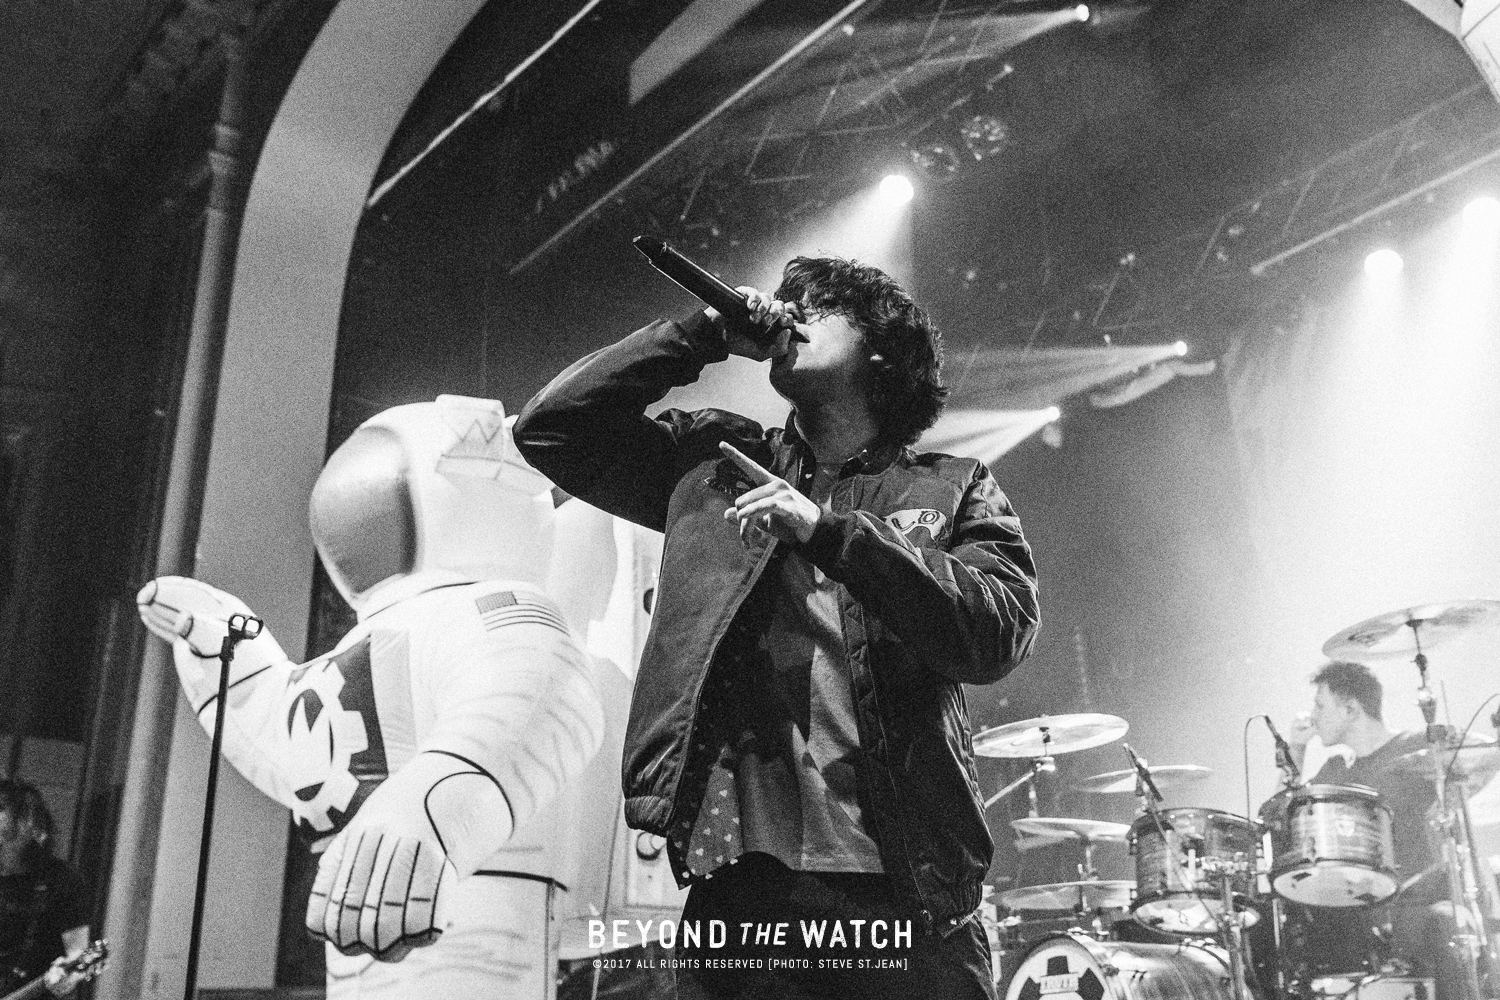  Crown The Empire at Danforth Music Hall 